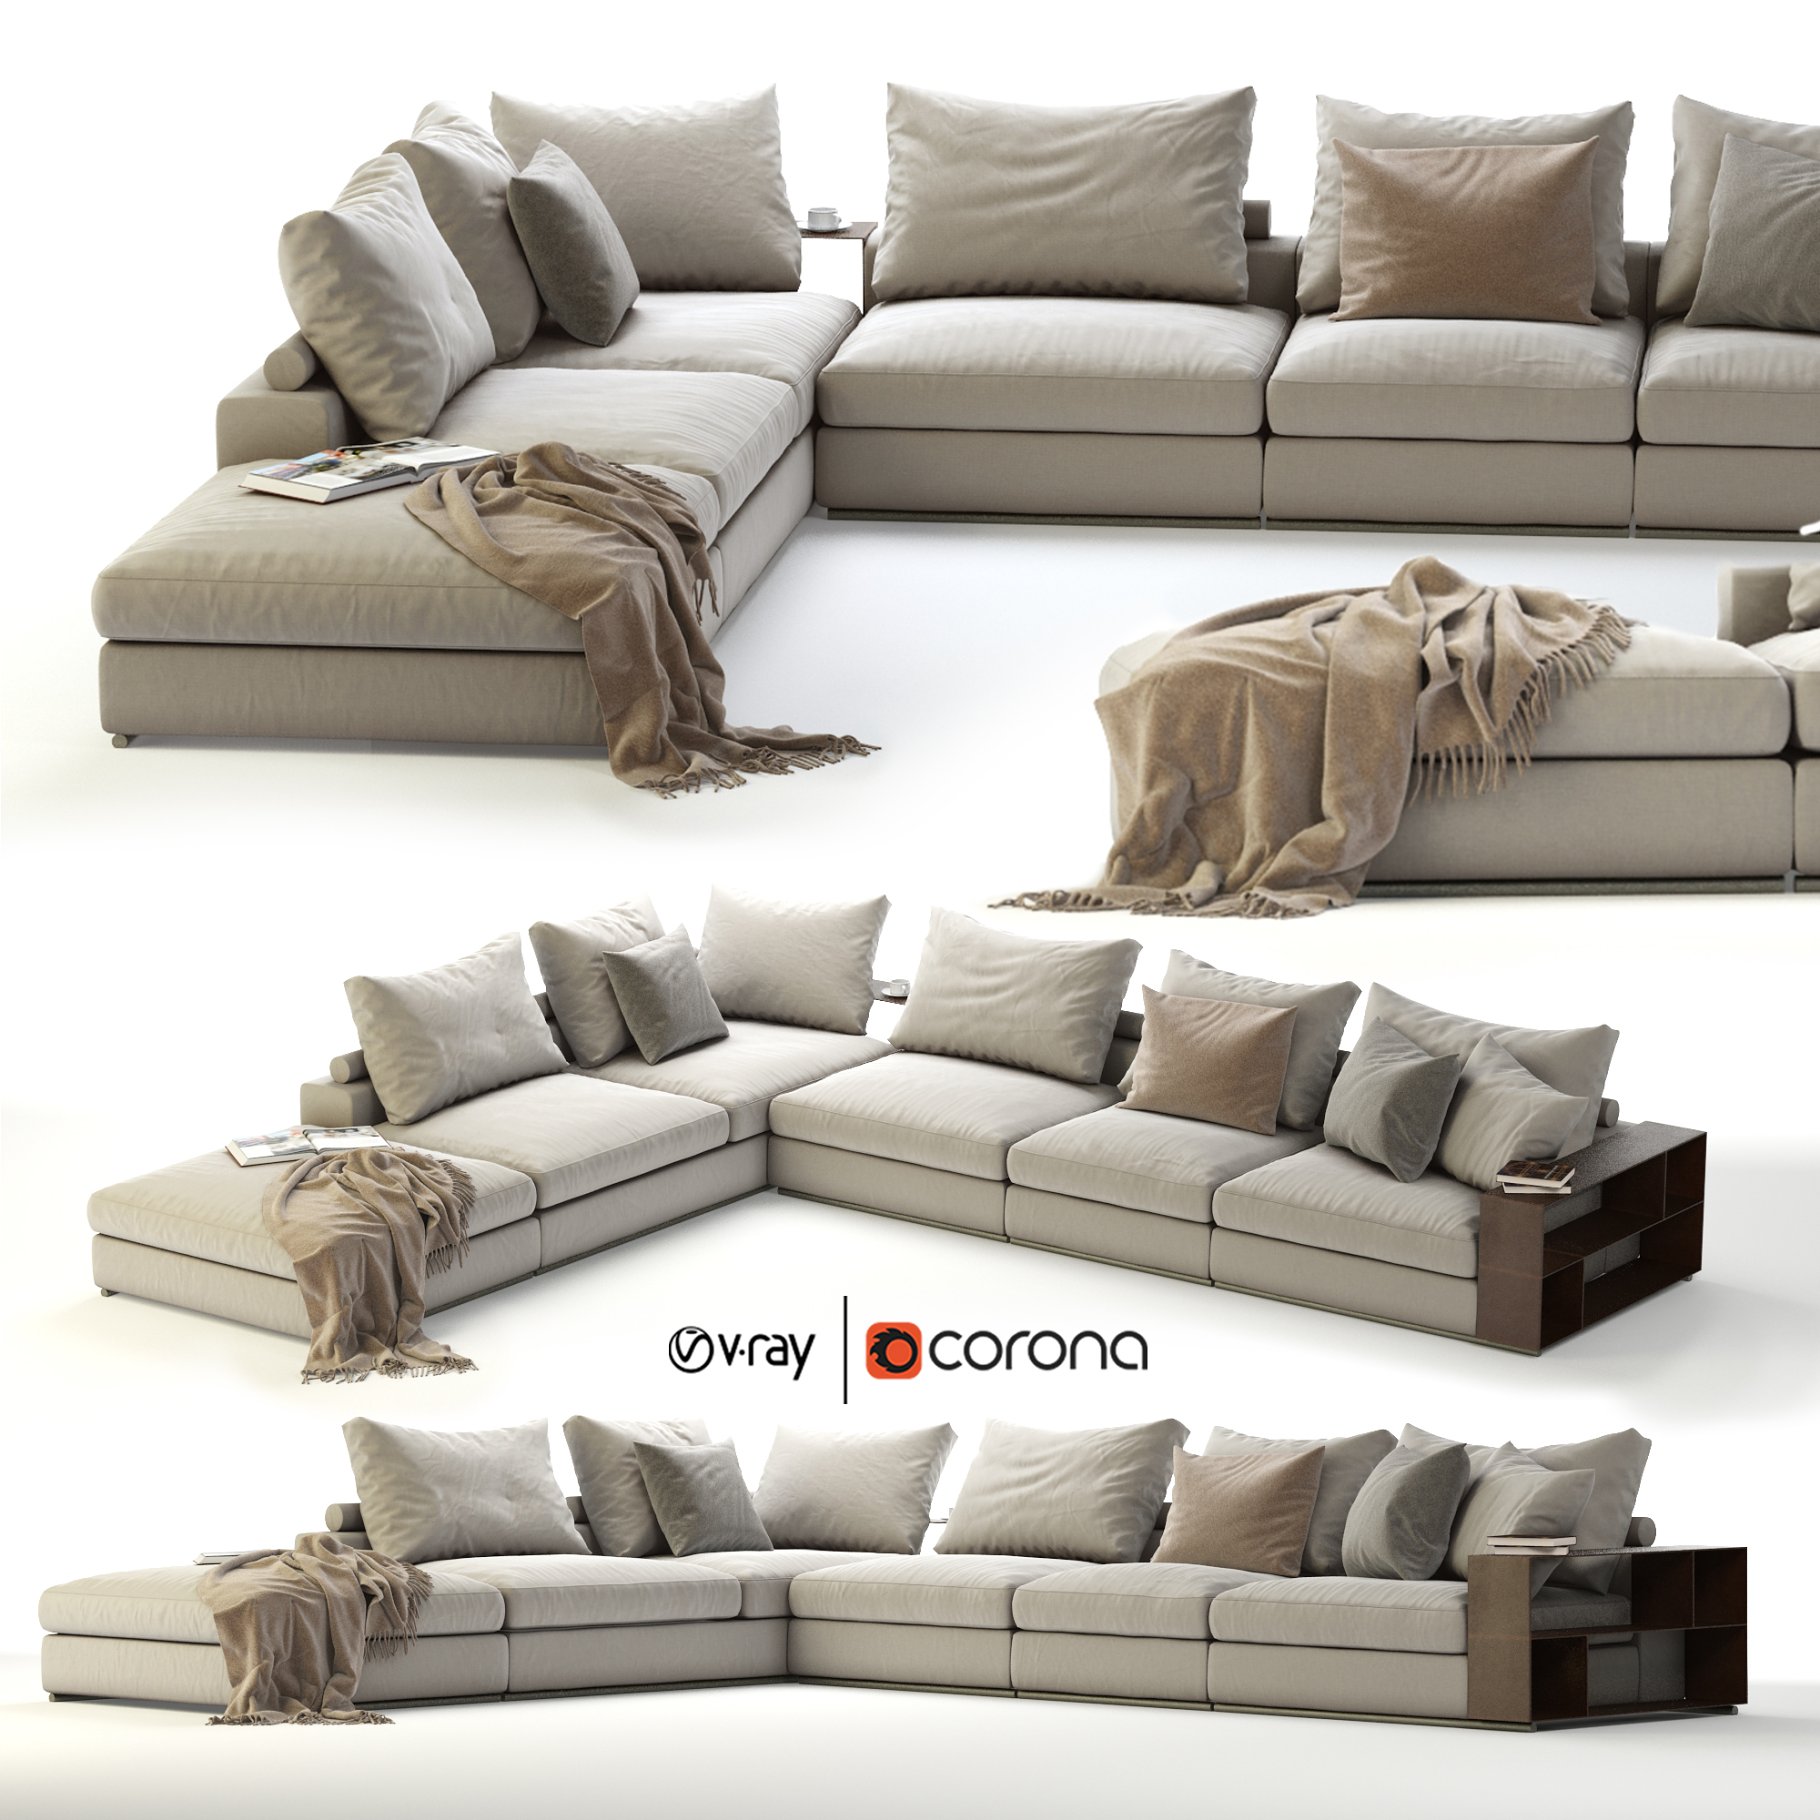 Images of a charming 3D model of a corner sectional sofa from different angles